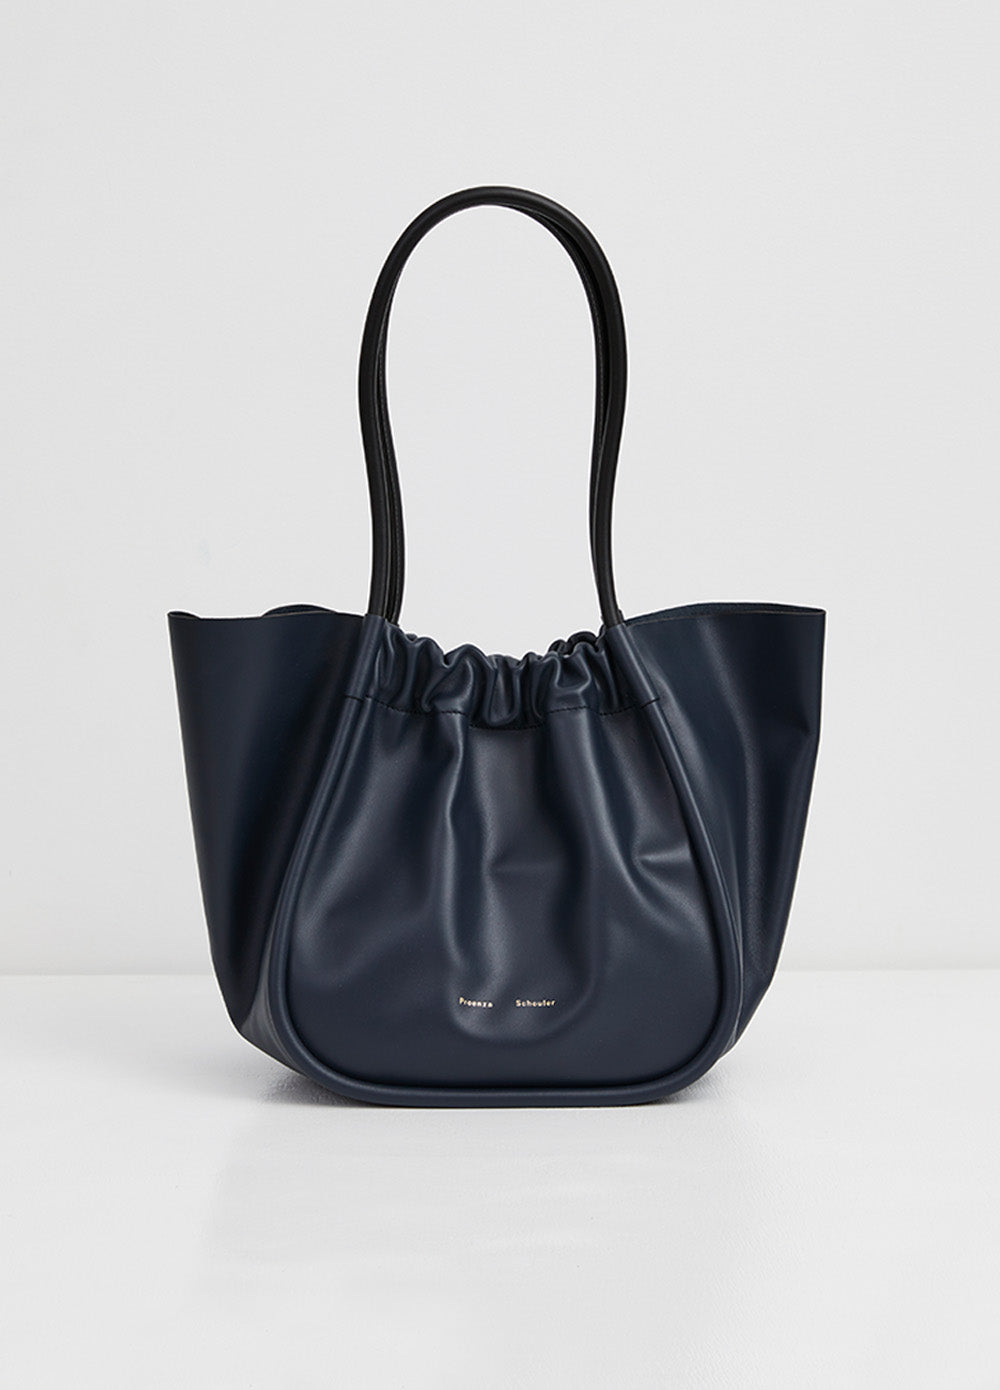 Classic Ruched Tote